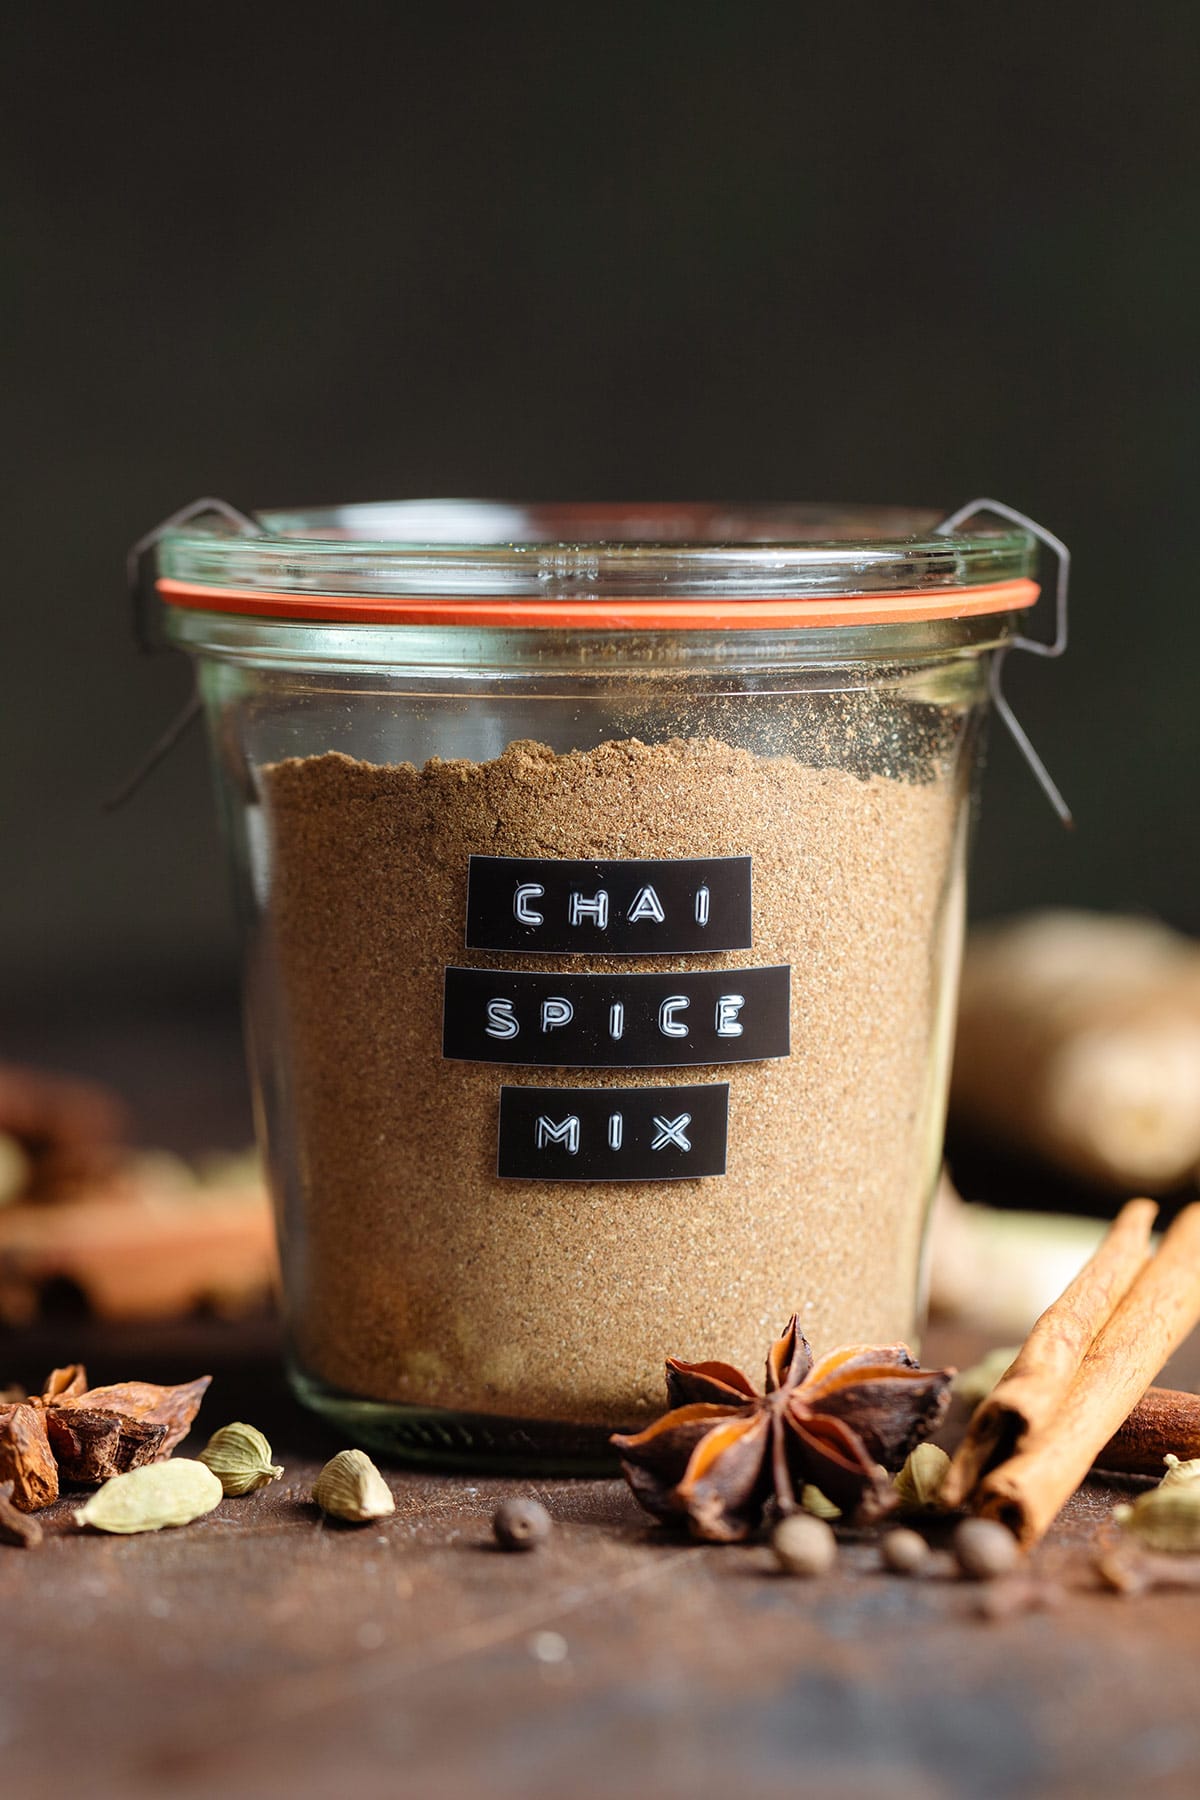 Chai spice mix in a glass jar with a black embossed label on the side.